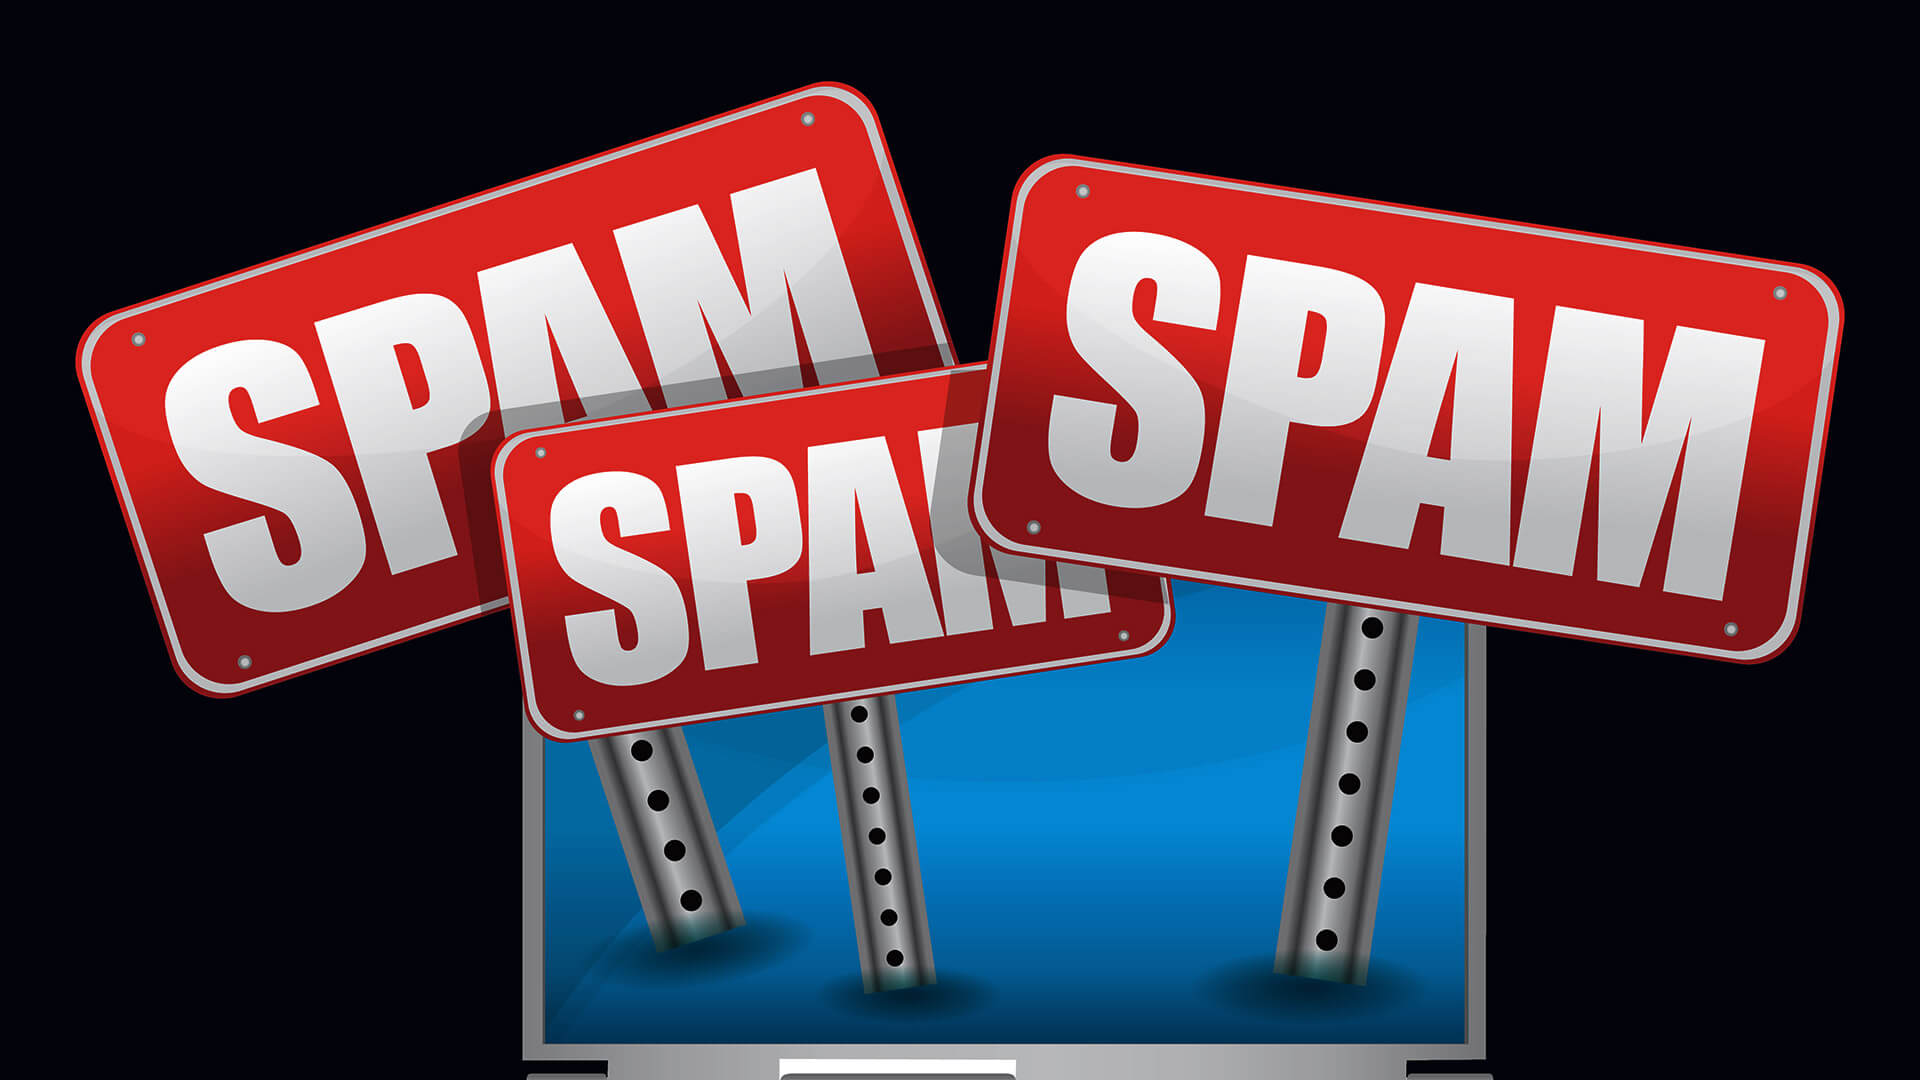 Google Search releases spam update on June 23